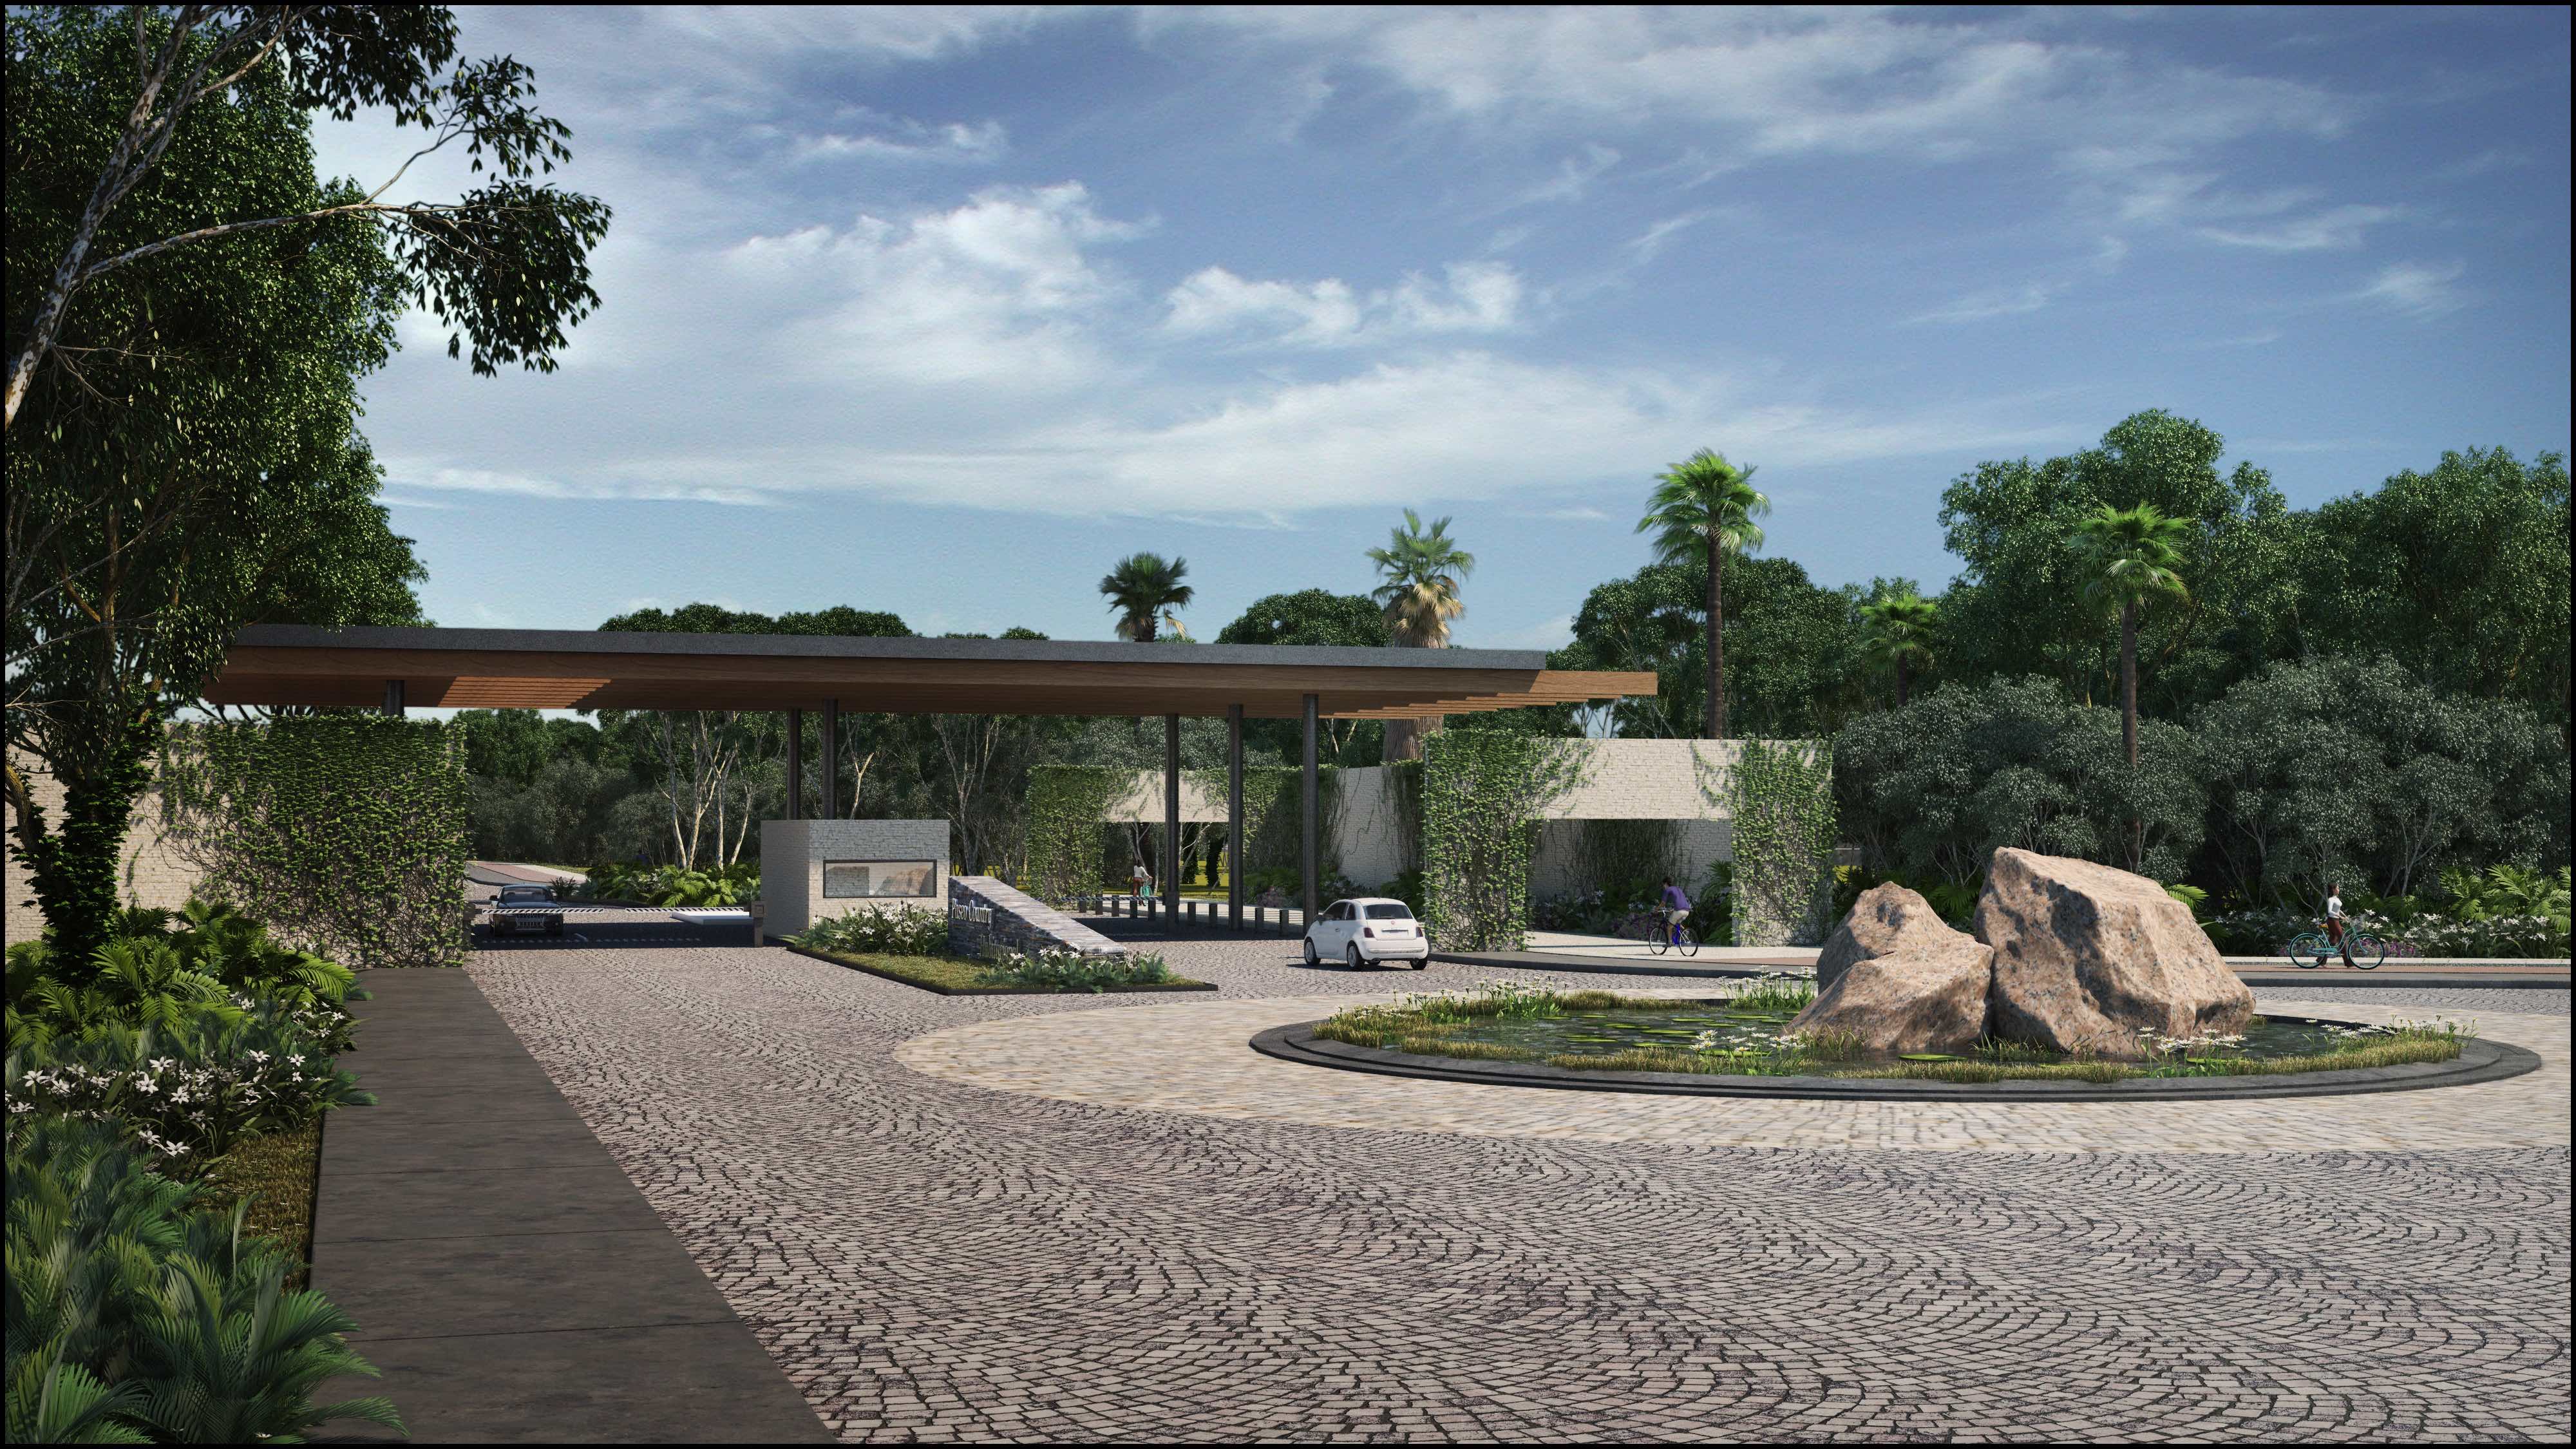 Planned Community in Merida. Inmobilia project, Paseo Country.